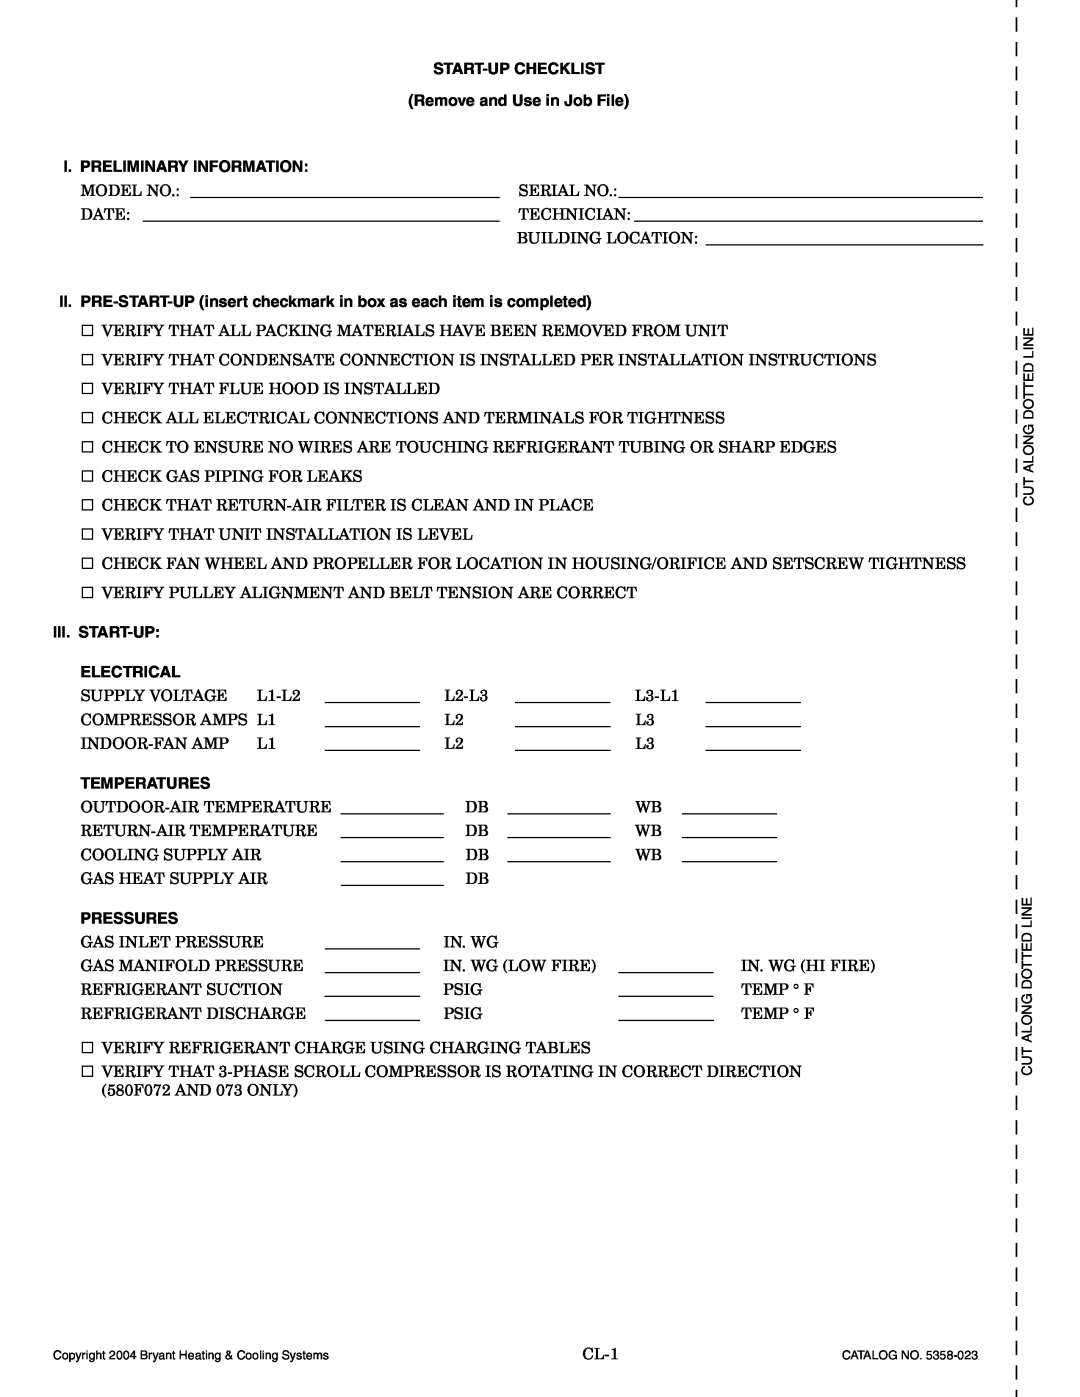 Bryant 580F START-UPCHECKLIST Remove and Use in Job File, I. Preliminary Information, Iii. Start-Up, Electrical, Pressures 